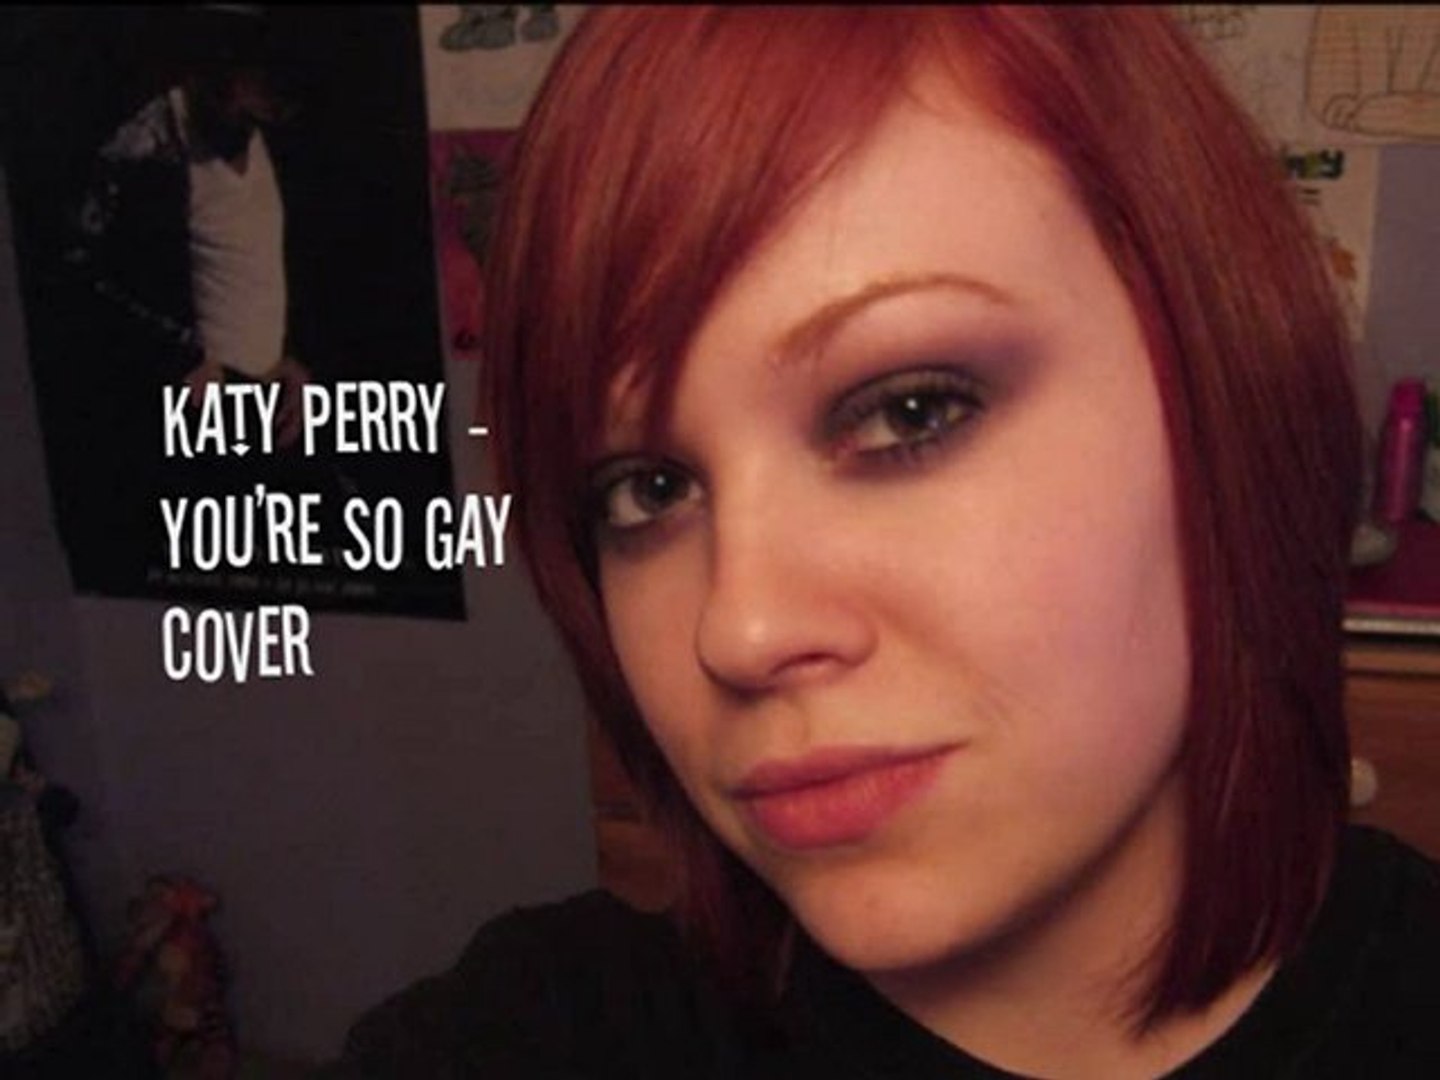 Katy Perry - You're So Gay cover